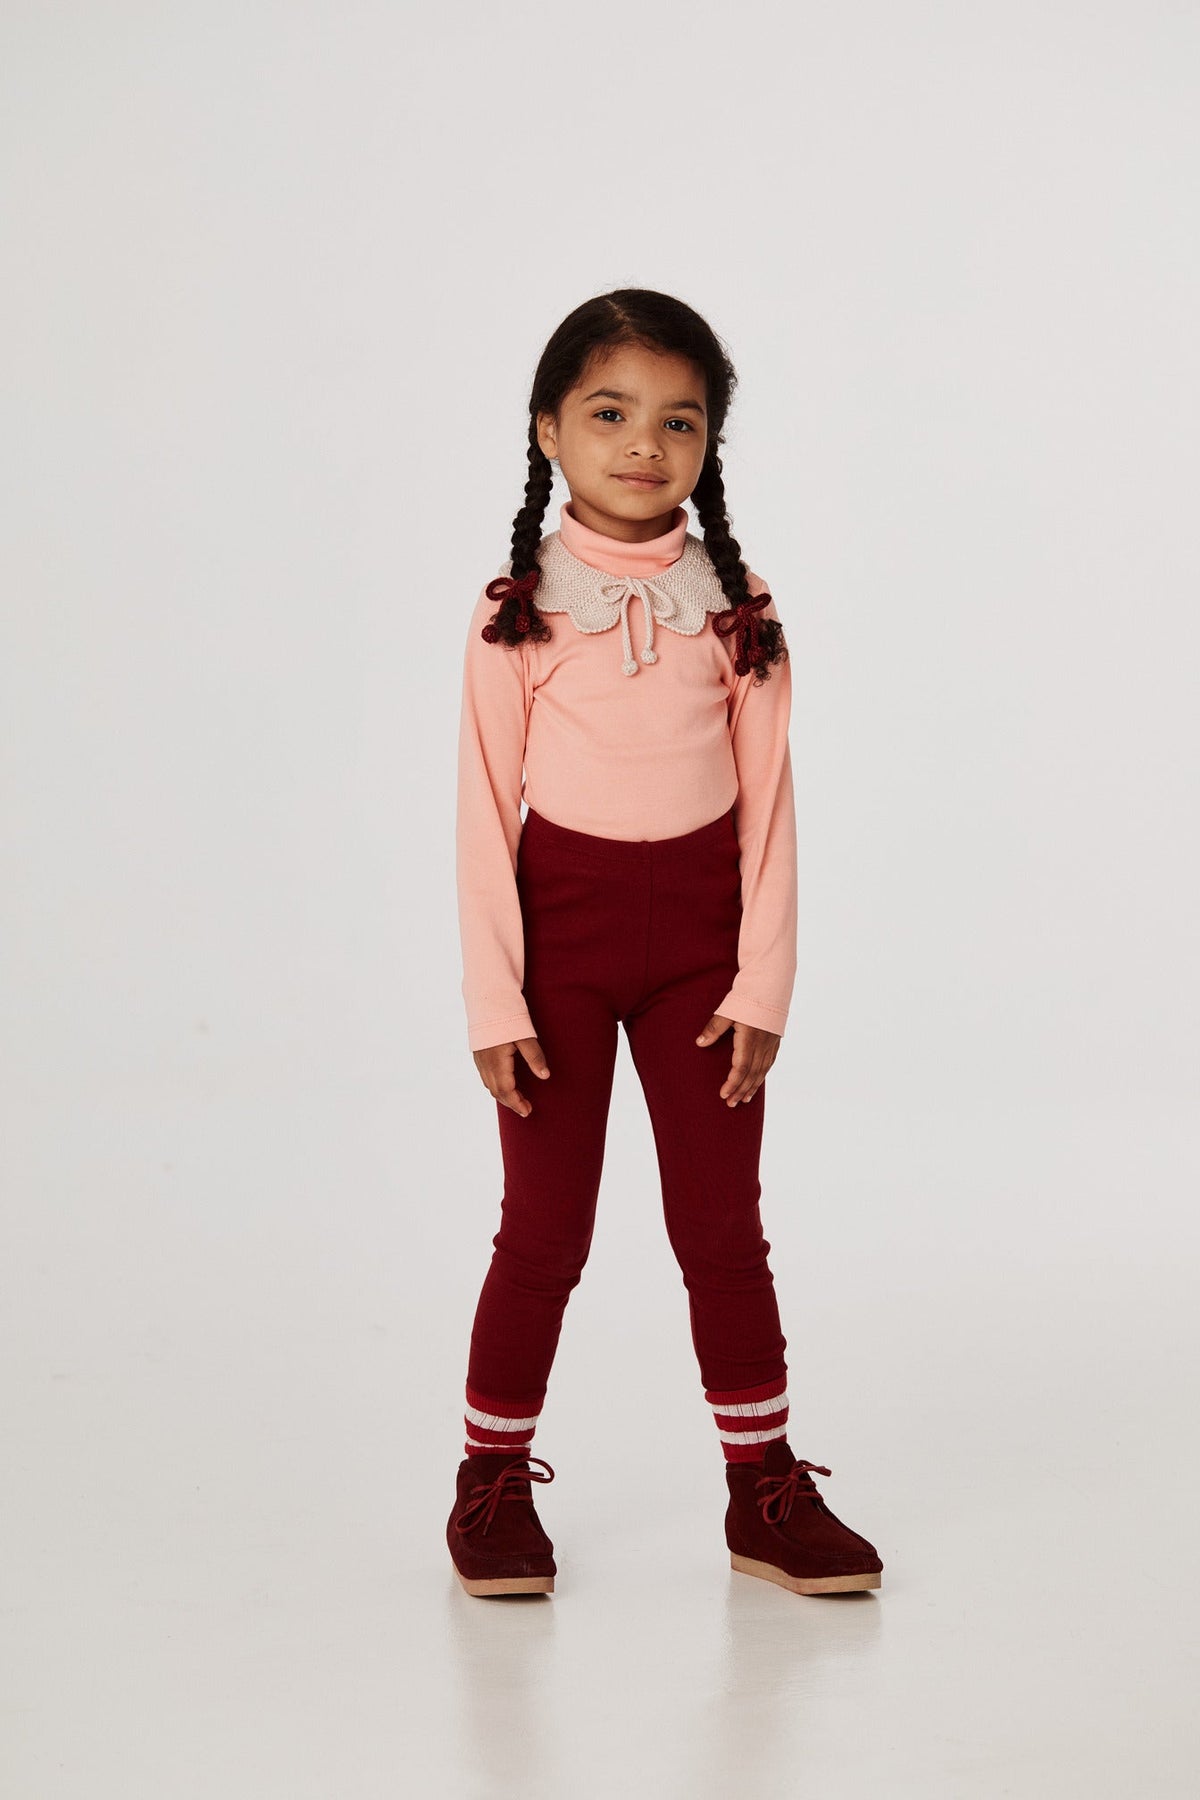 Legging - Cranberry+Model is 41 inches tall, 43lbs, wearing a size 4-5y